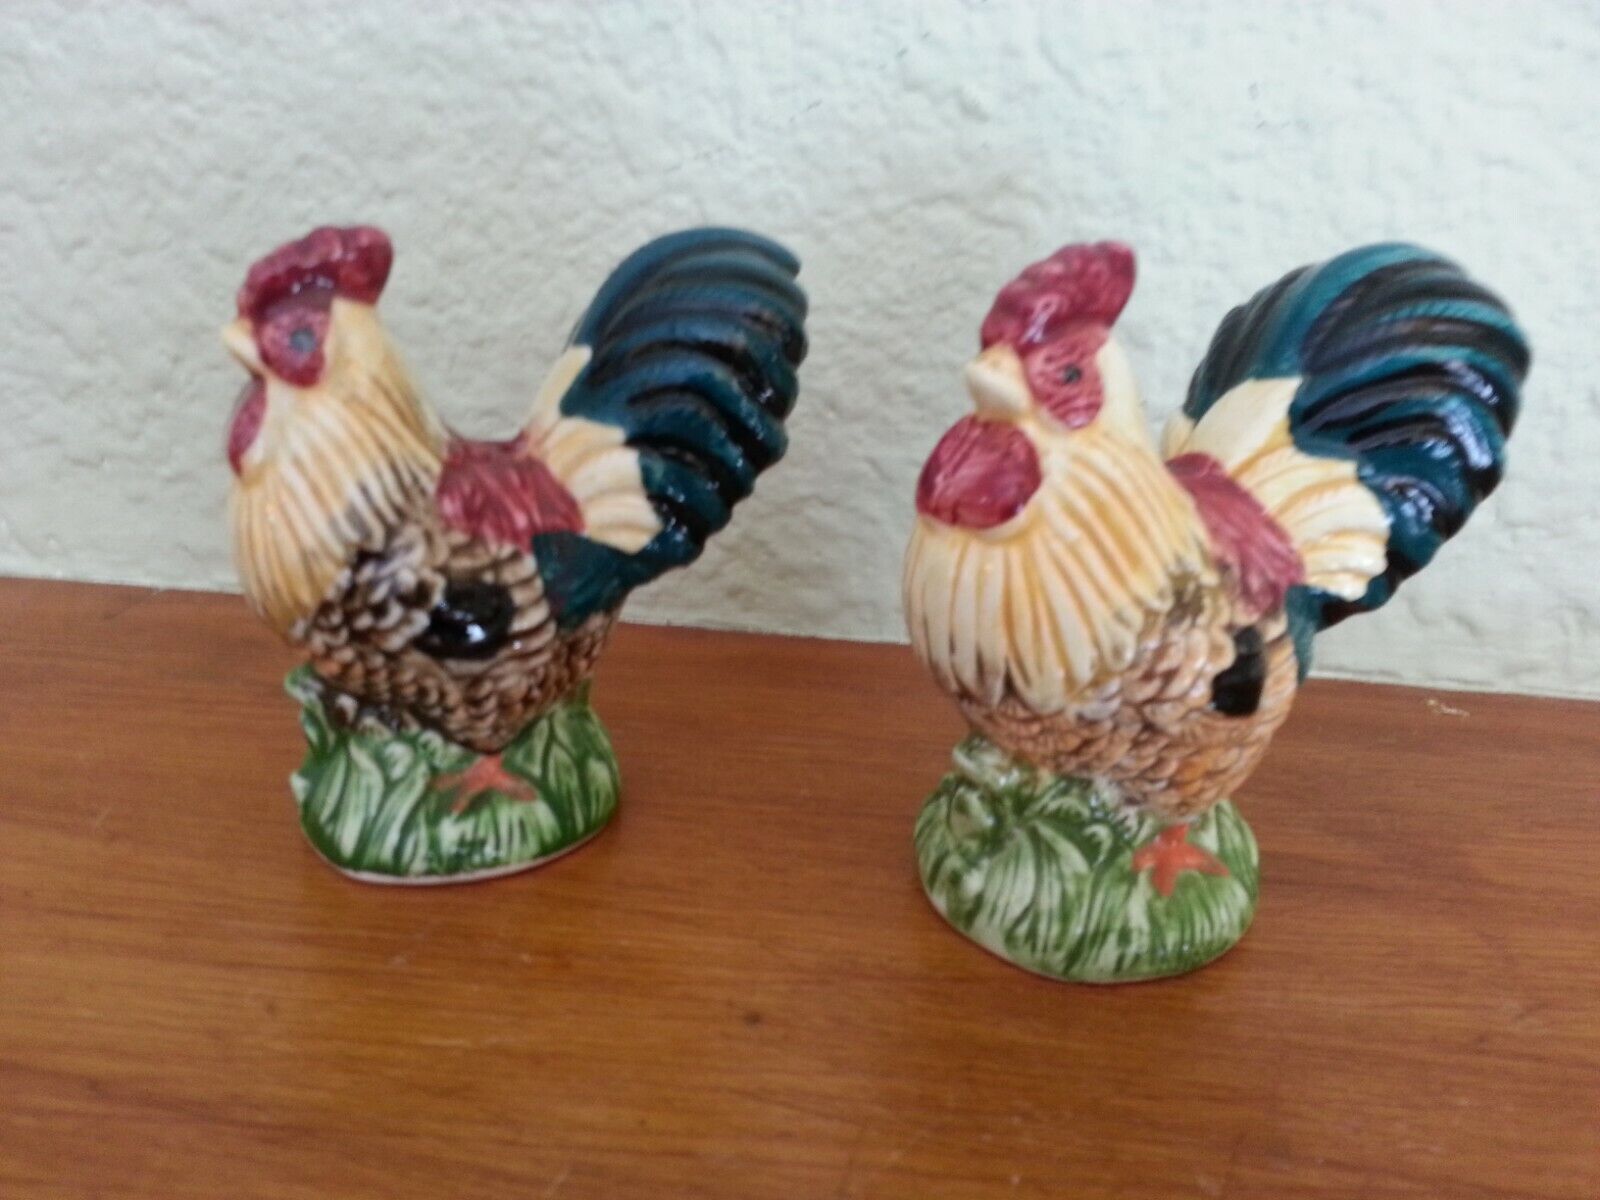 Vintage Salt and Pepper Shakers, Roosters, collectible, Made in China